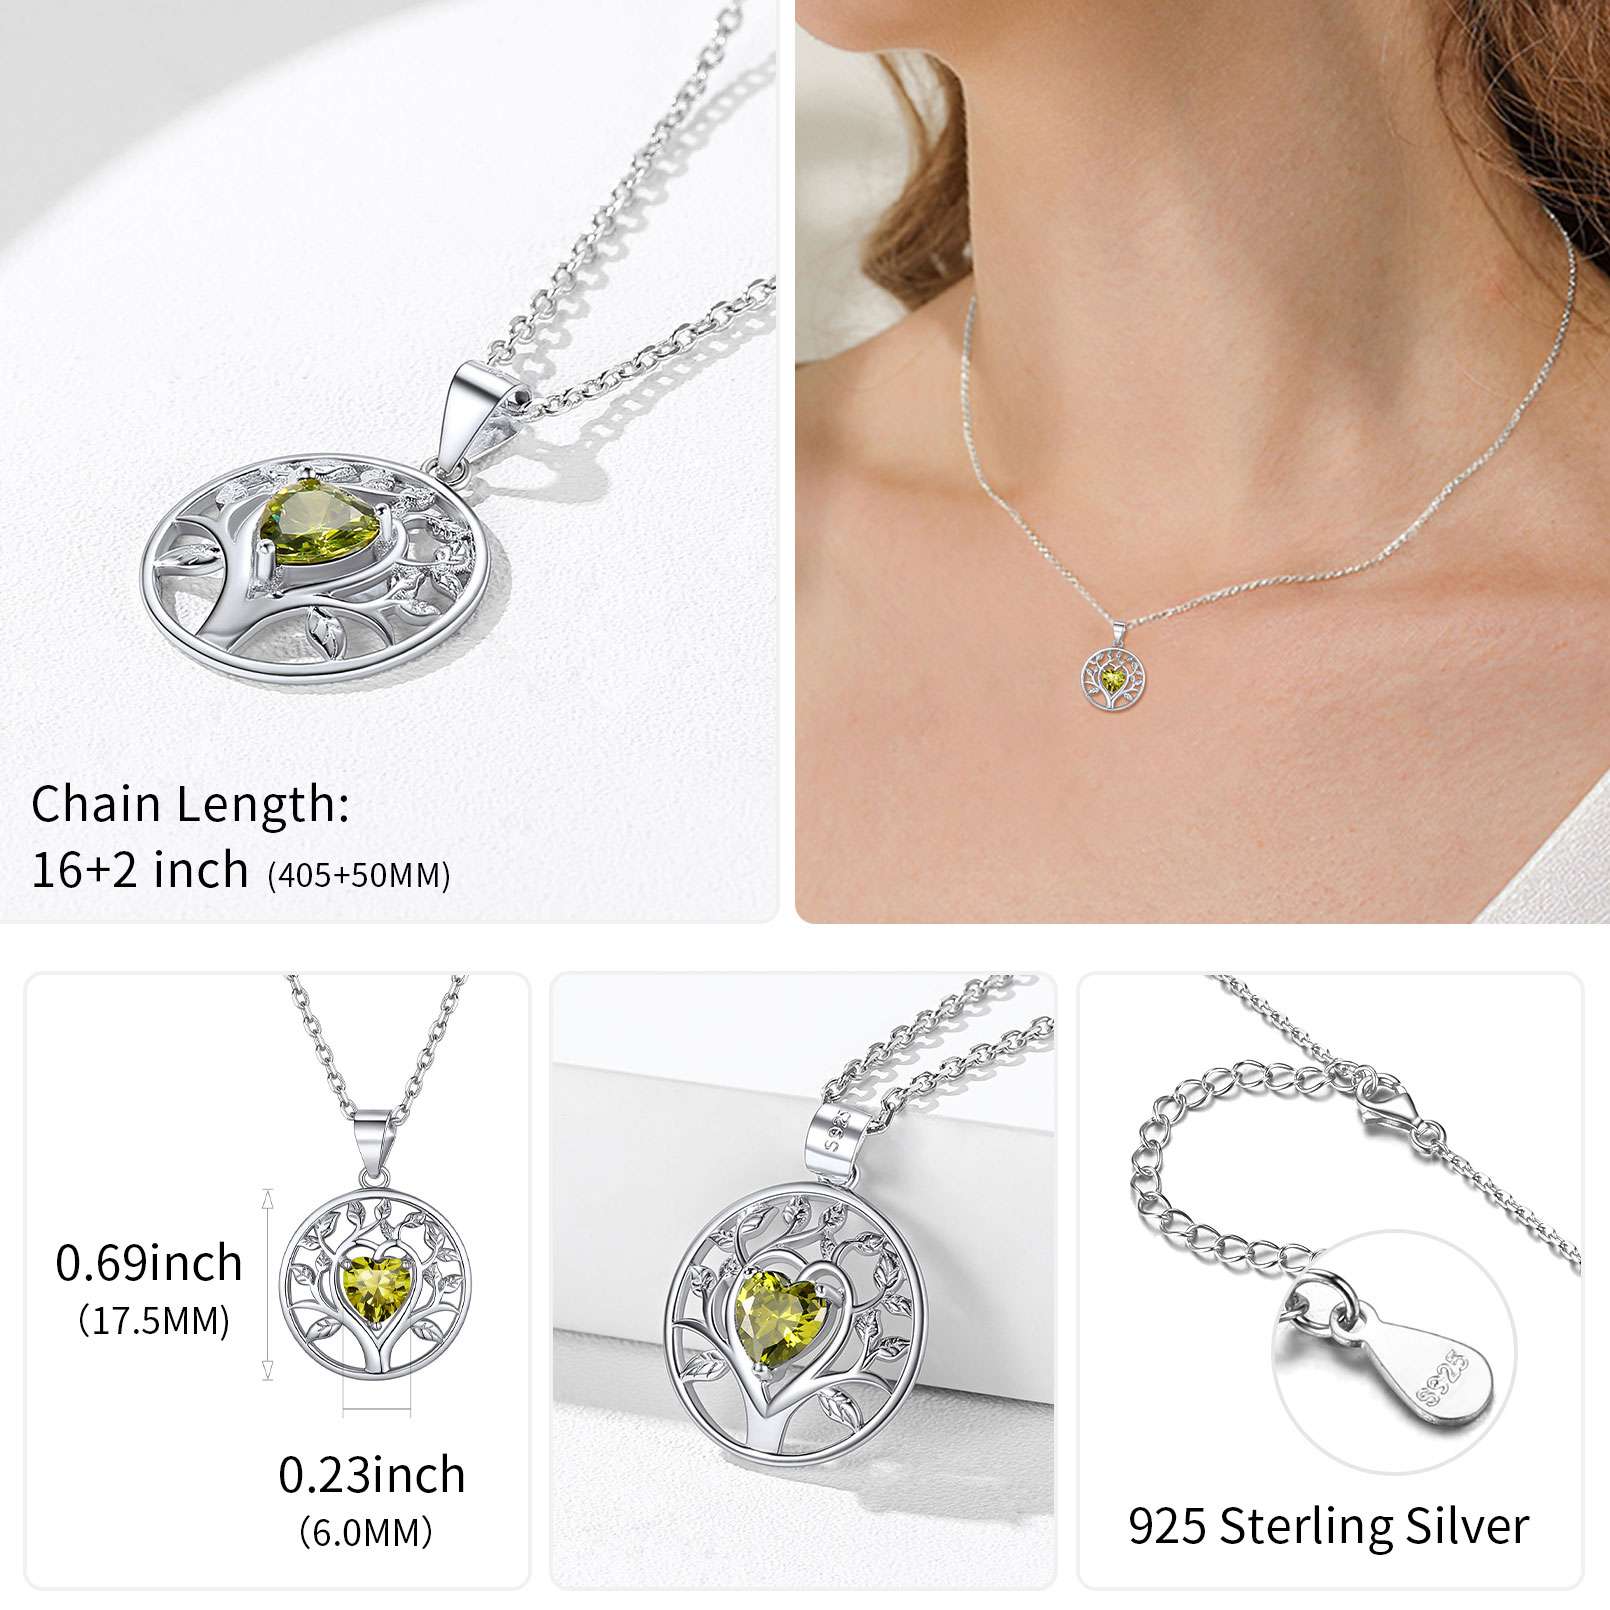 S925 Silver Tree Of Life Necklace With Heart Birthstone For Women